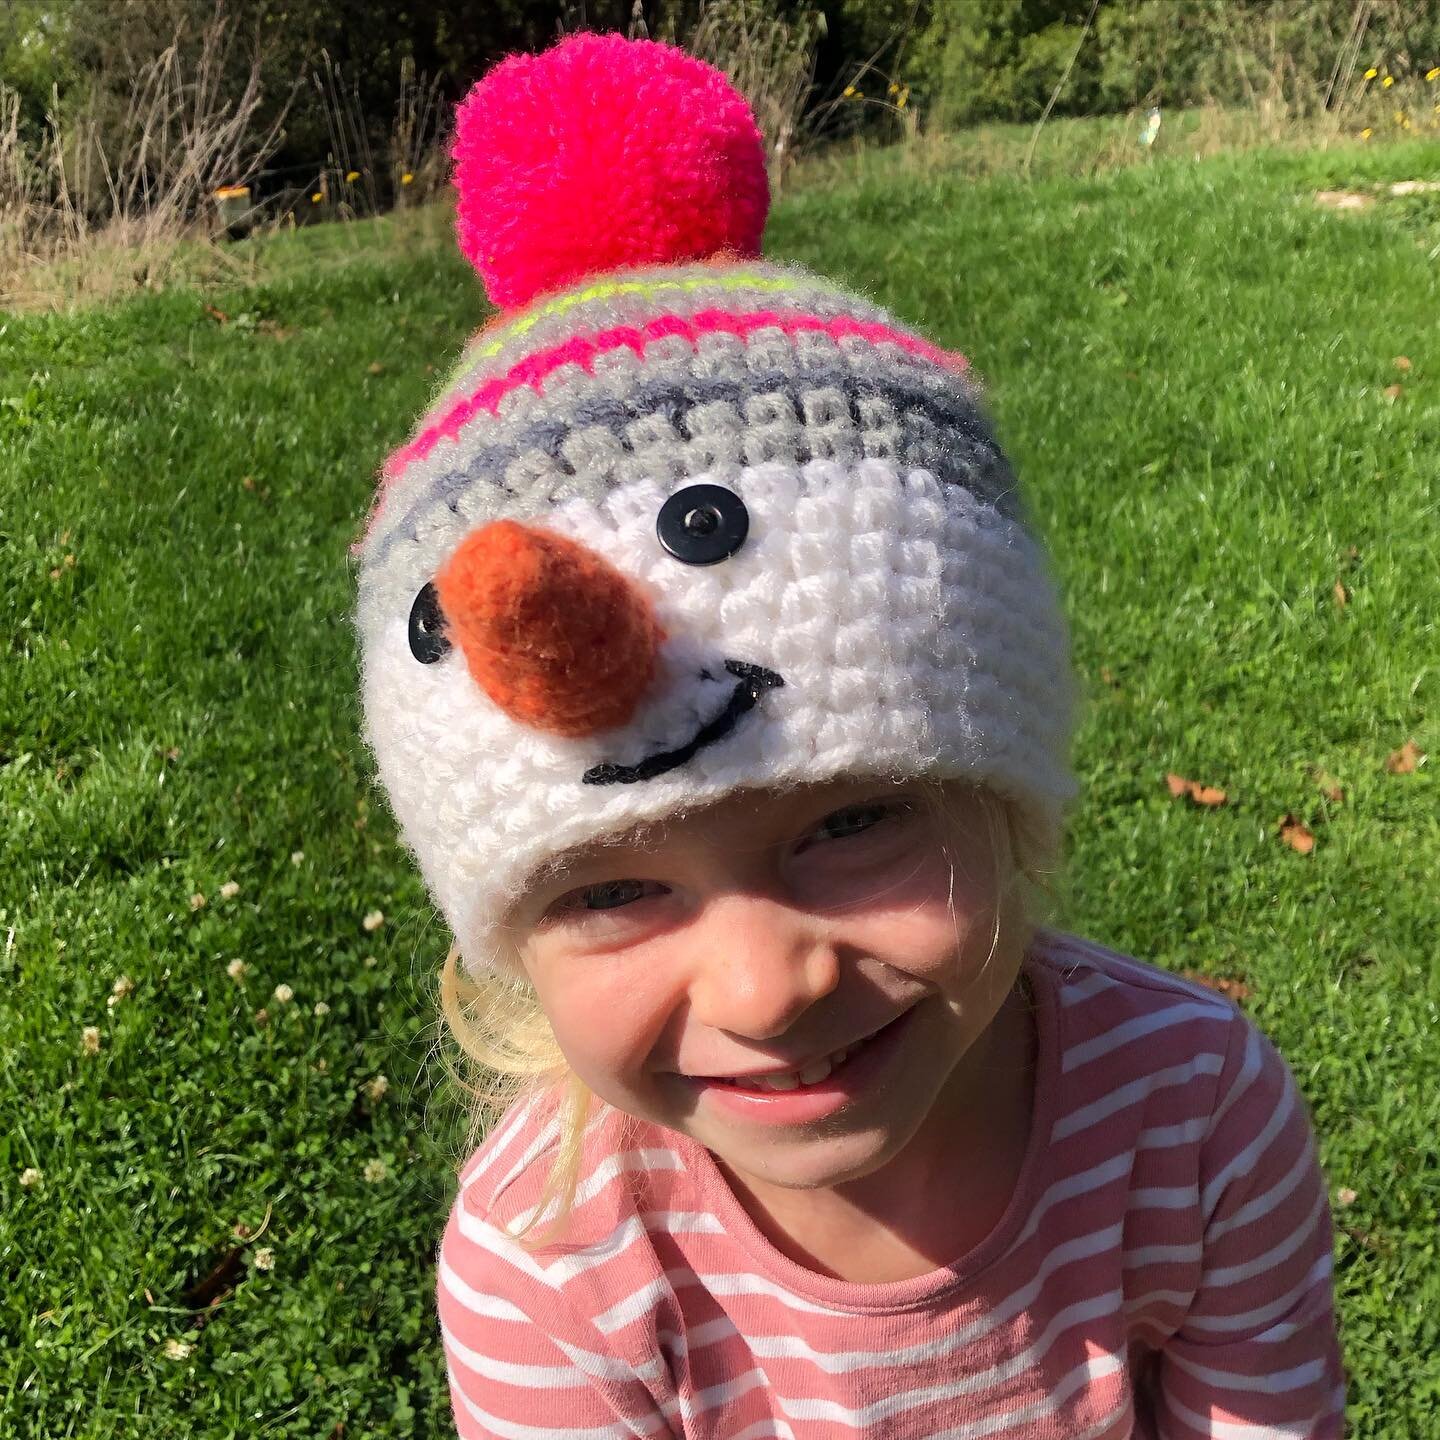 My little pal modelling her snowman beanie for me. 😍 

This beanie and many more available 👉https://www.kbeanies.com/kids/cheeky-snowman-beanie 

________________________________✍️
#beanies #designyourown #custombeanie  #snowman #adorable #cheeky #